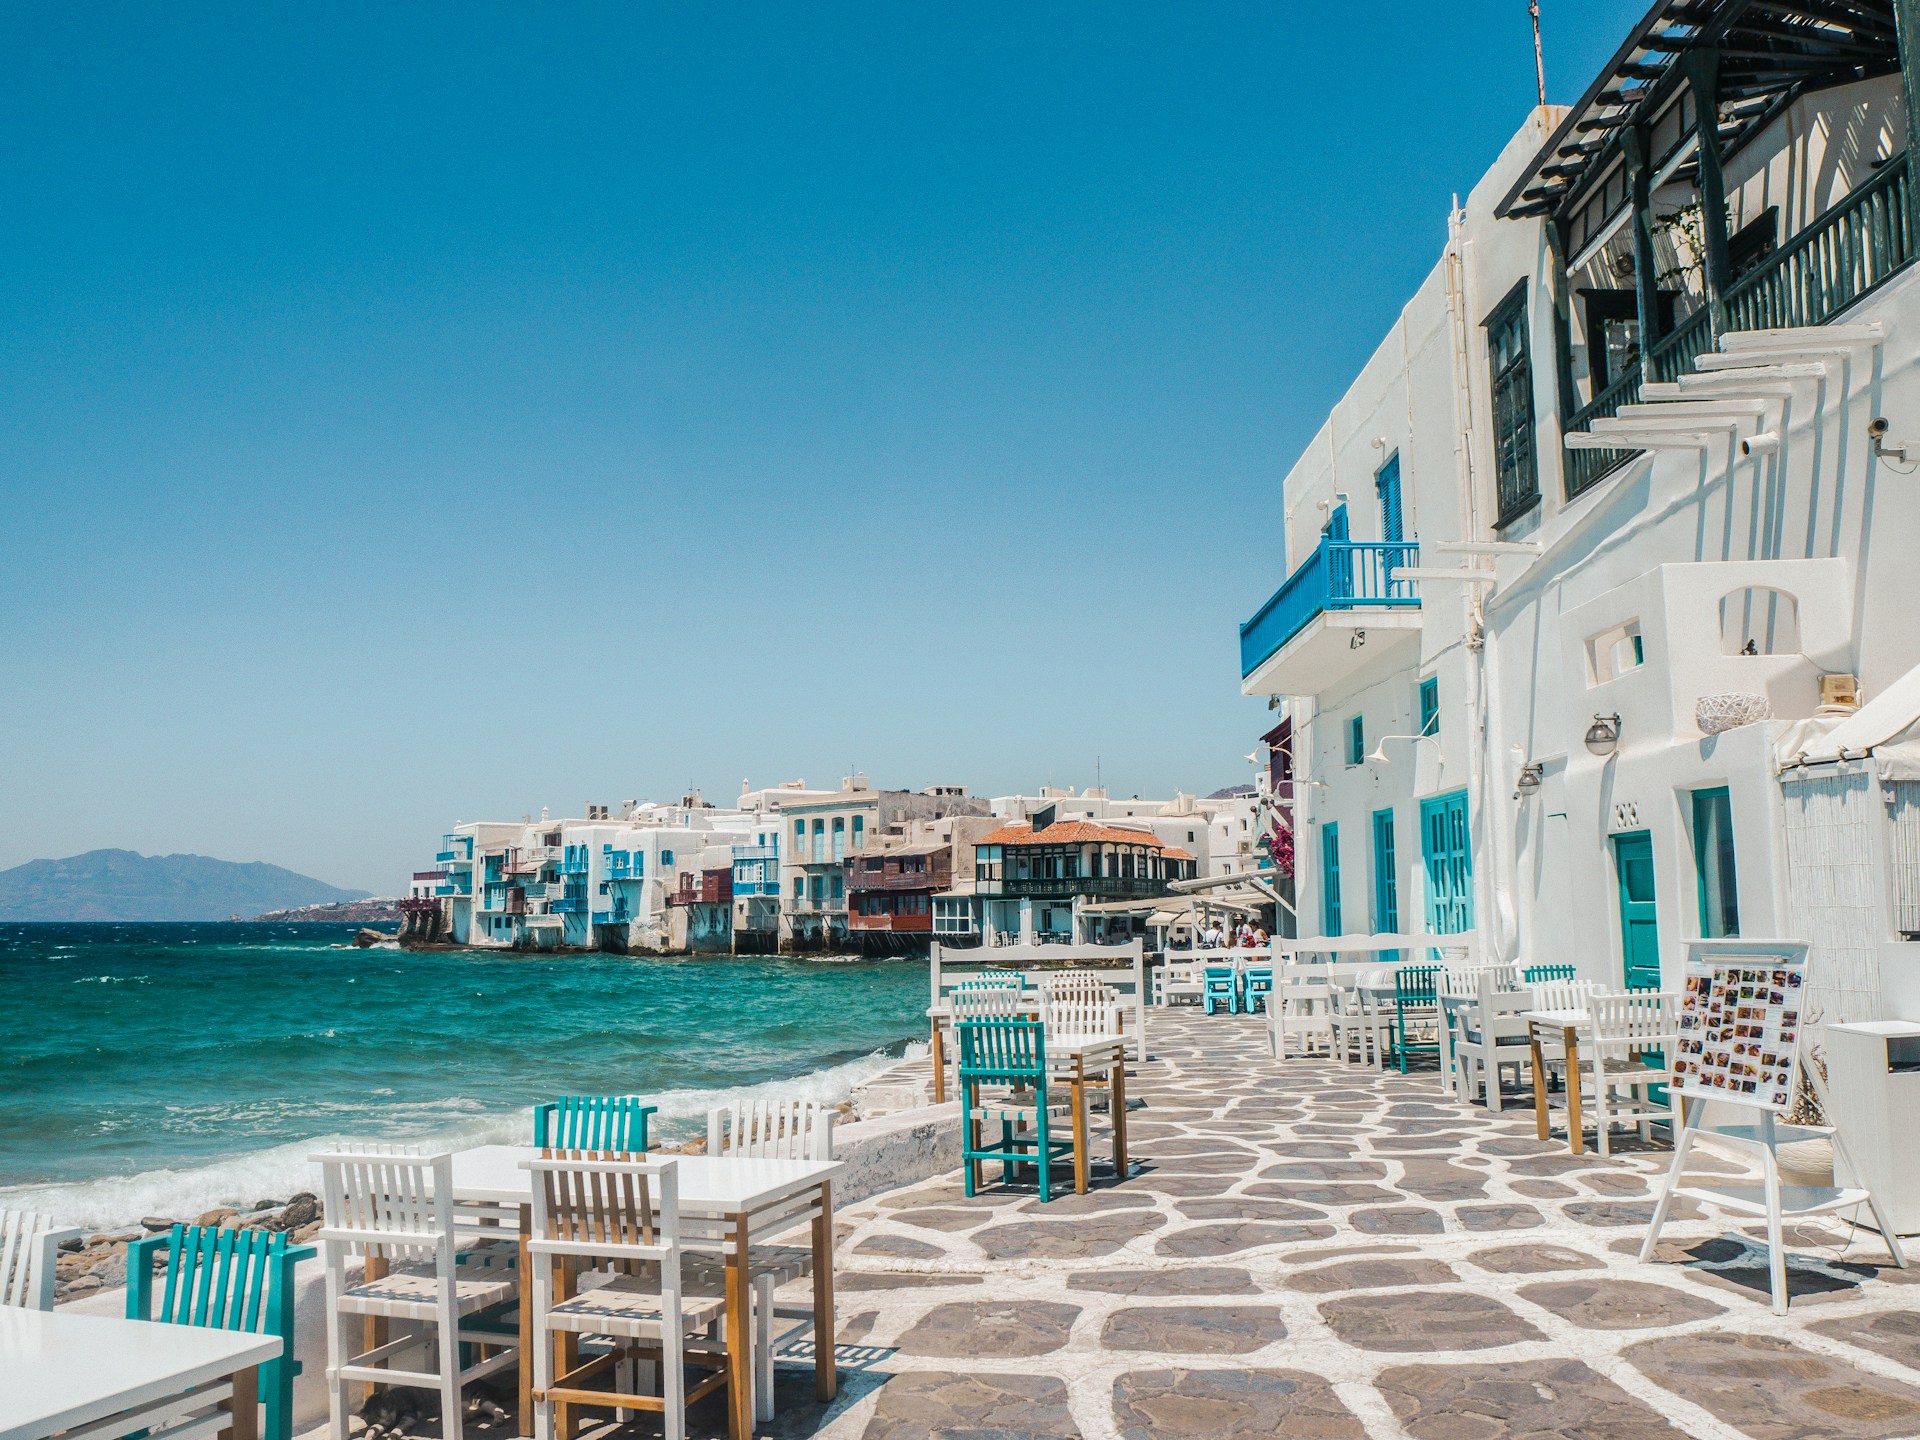 Chairs and tables outside a restaurant in a Greek harbor